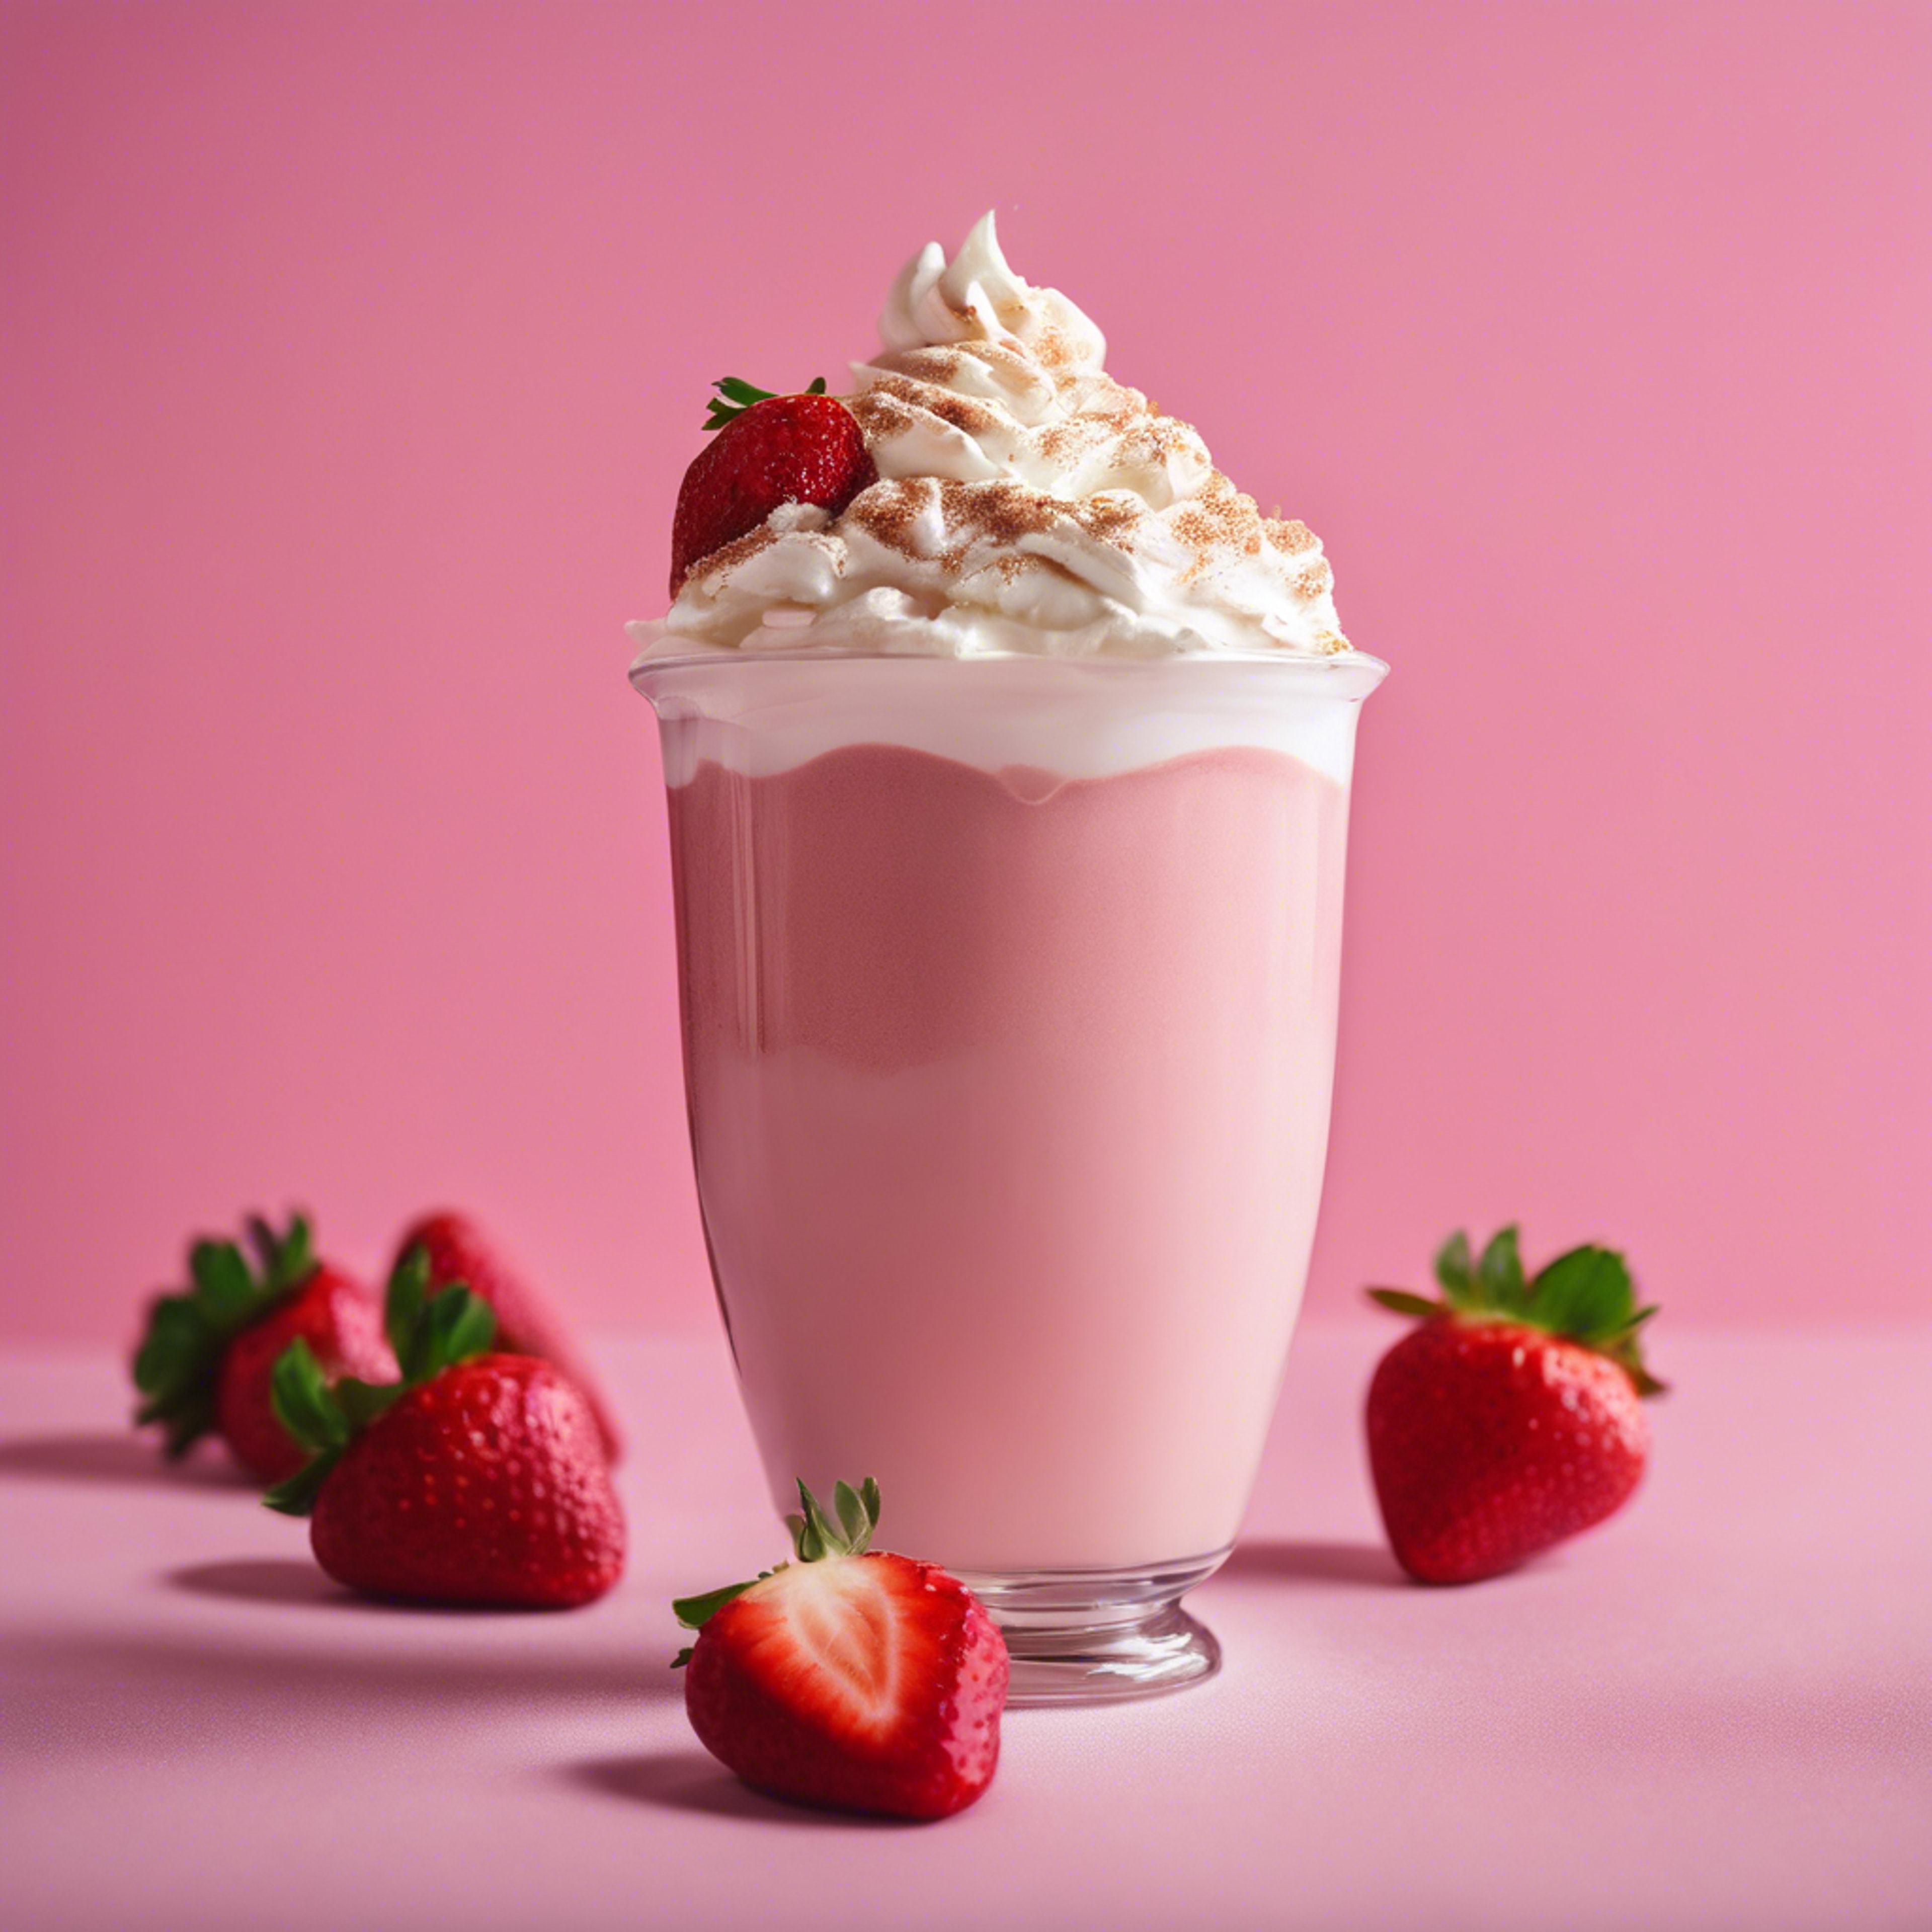 A freshly brewed strawberry latte with whipped cream against a pink backdrop. 墙纸[f1420ed34c924526b0ea]